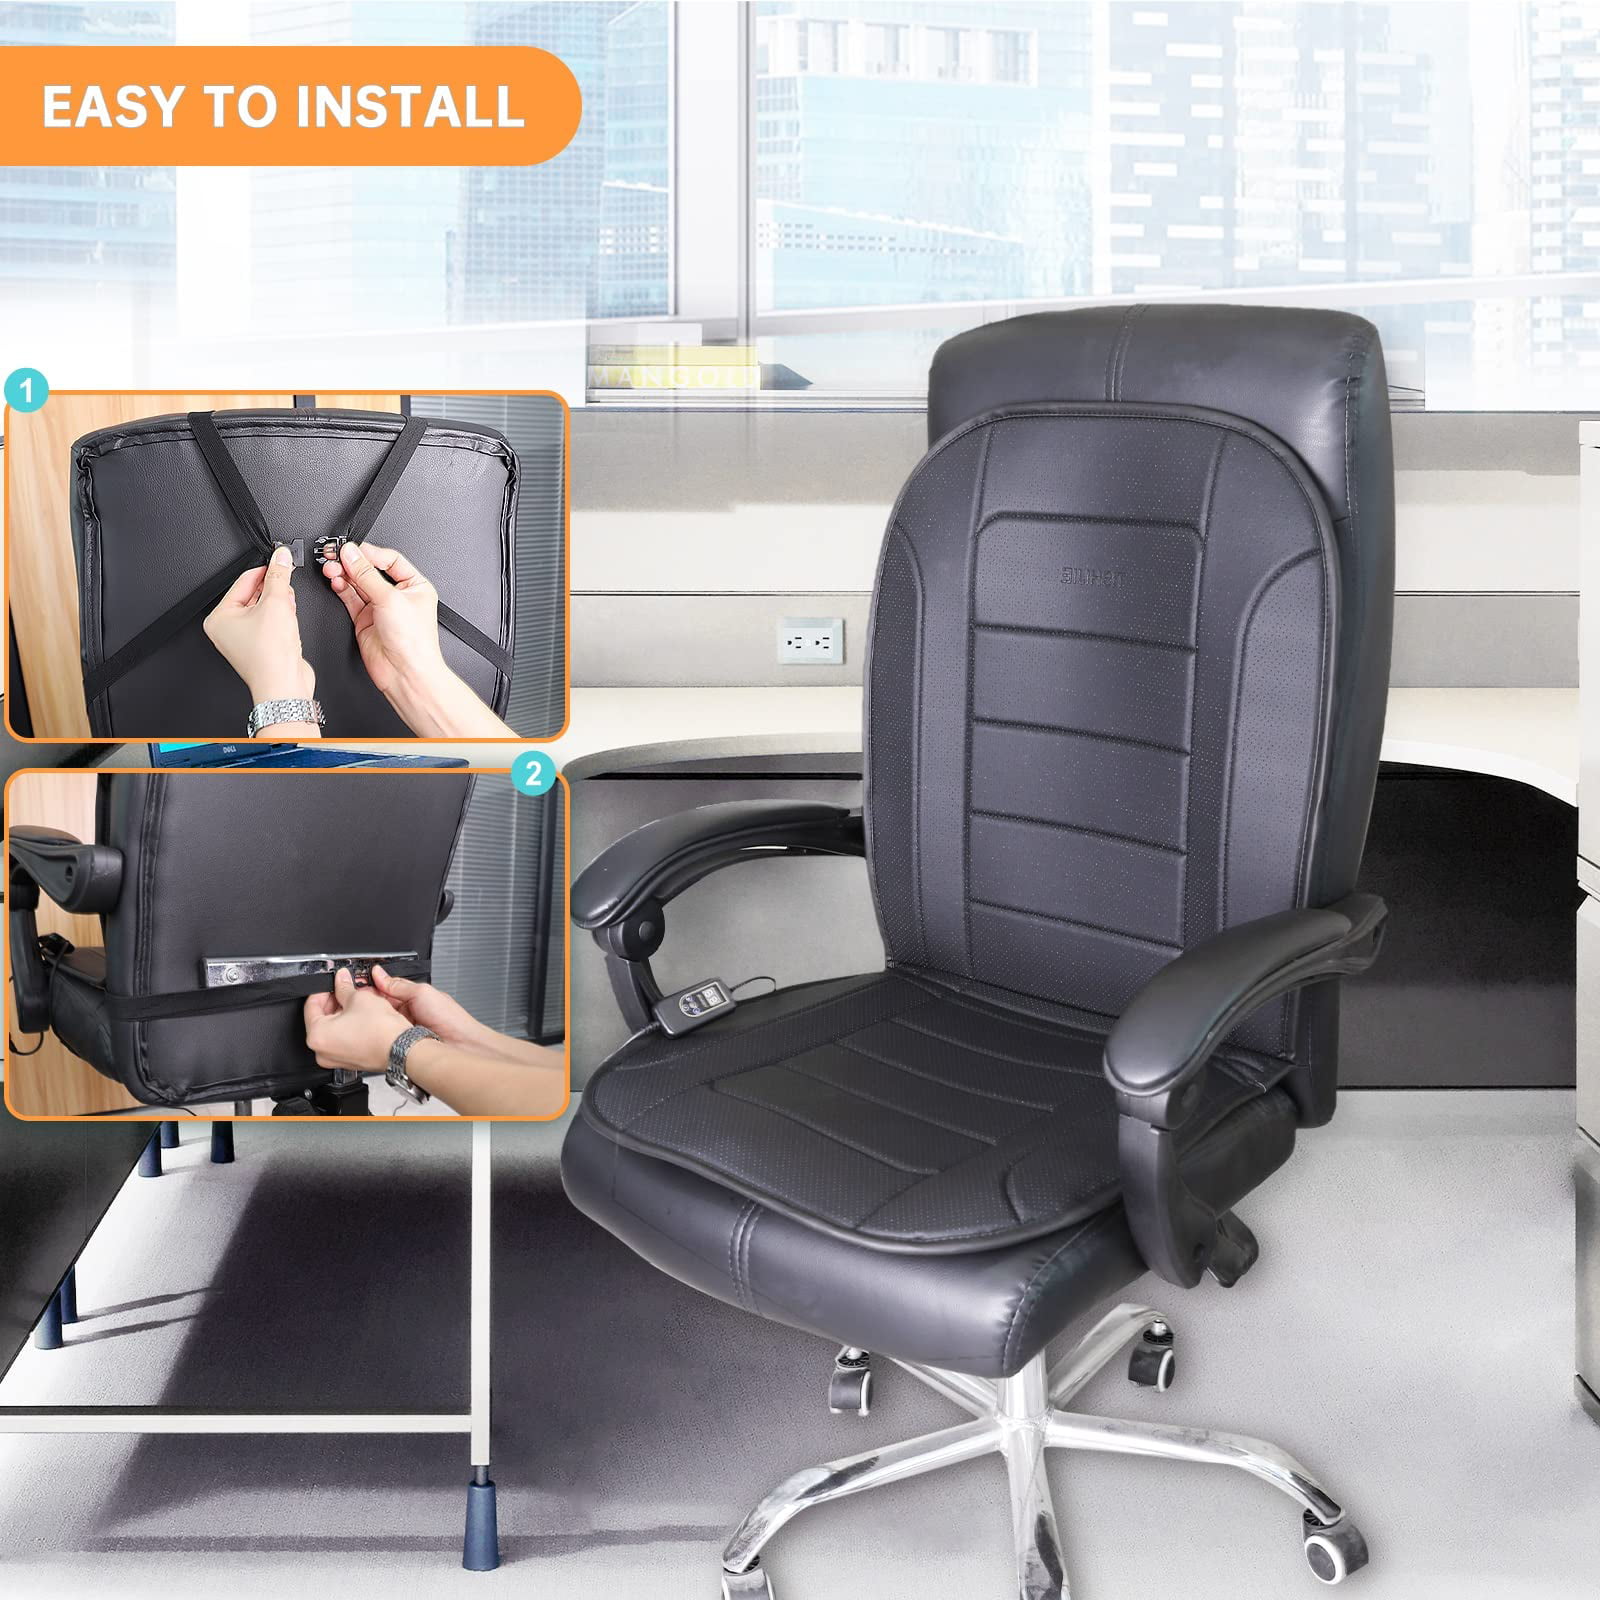 Heated seat cushion and backrest integrated office heating